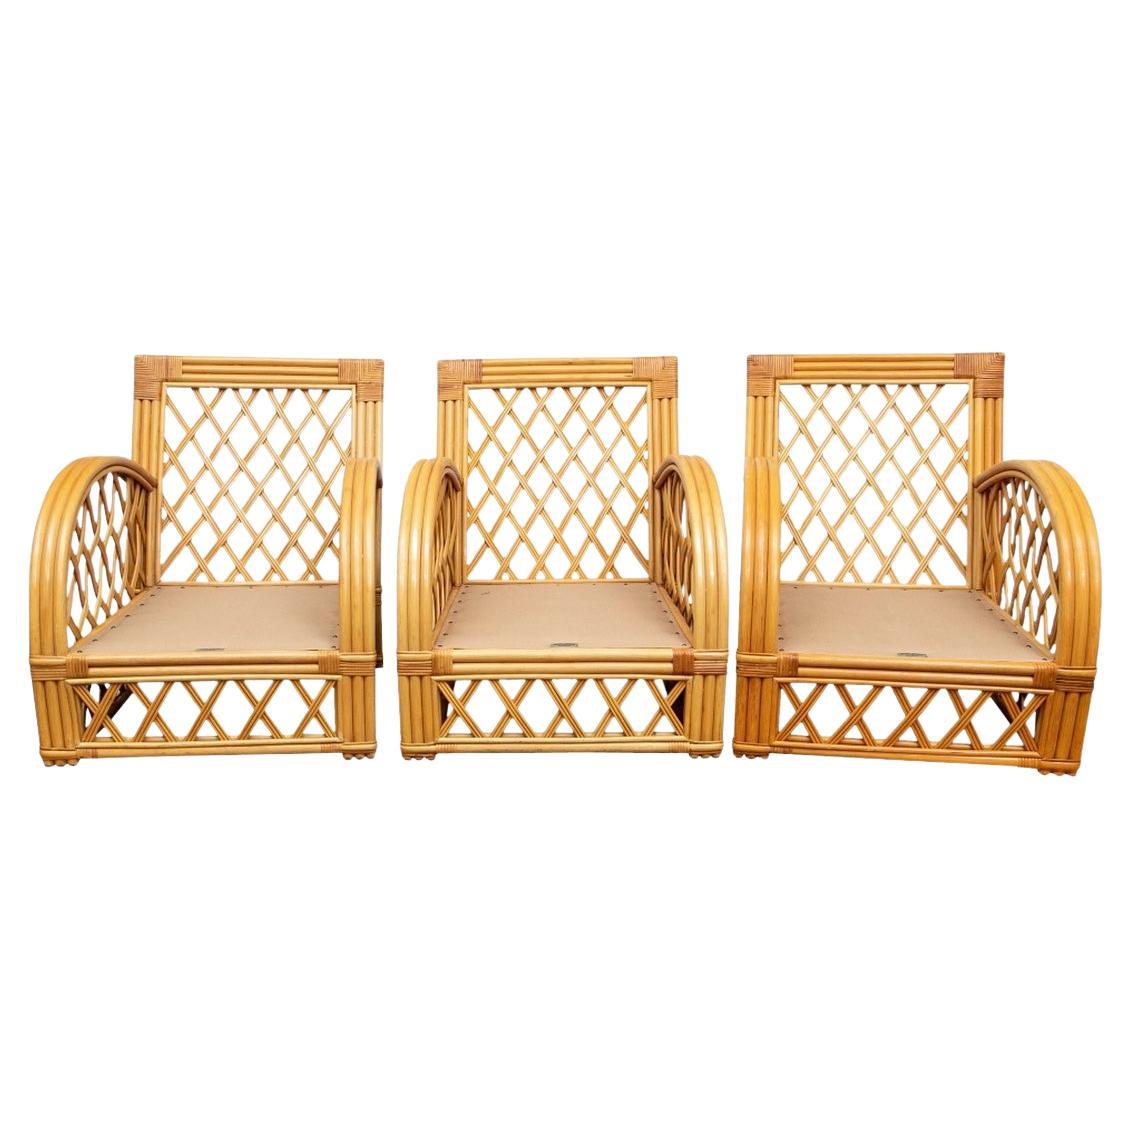 Group of 3 Bielecky Brothers Rattan Armchair Frames